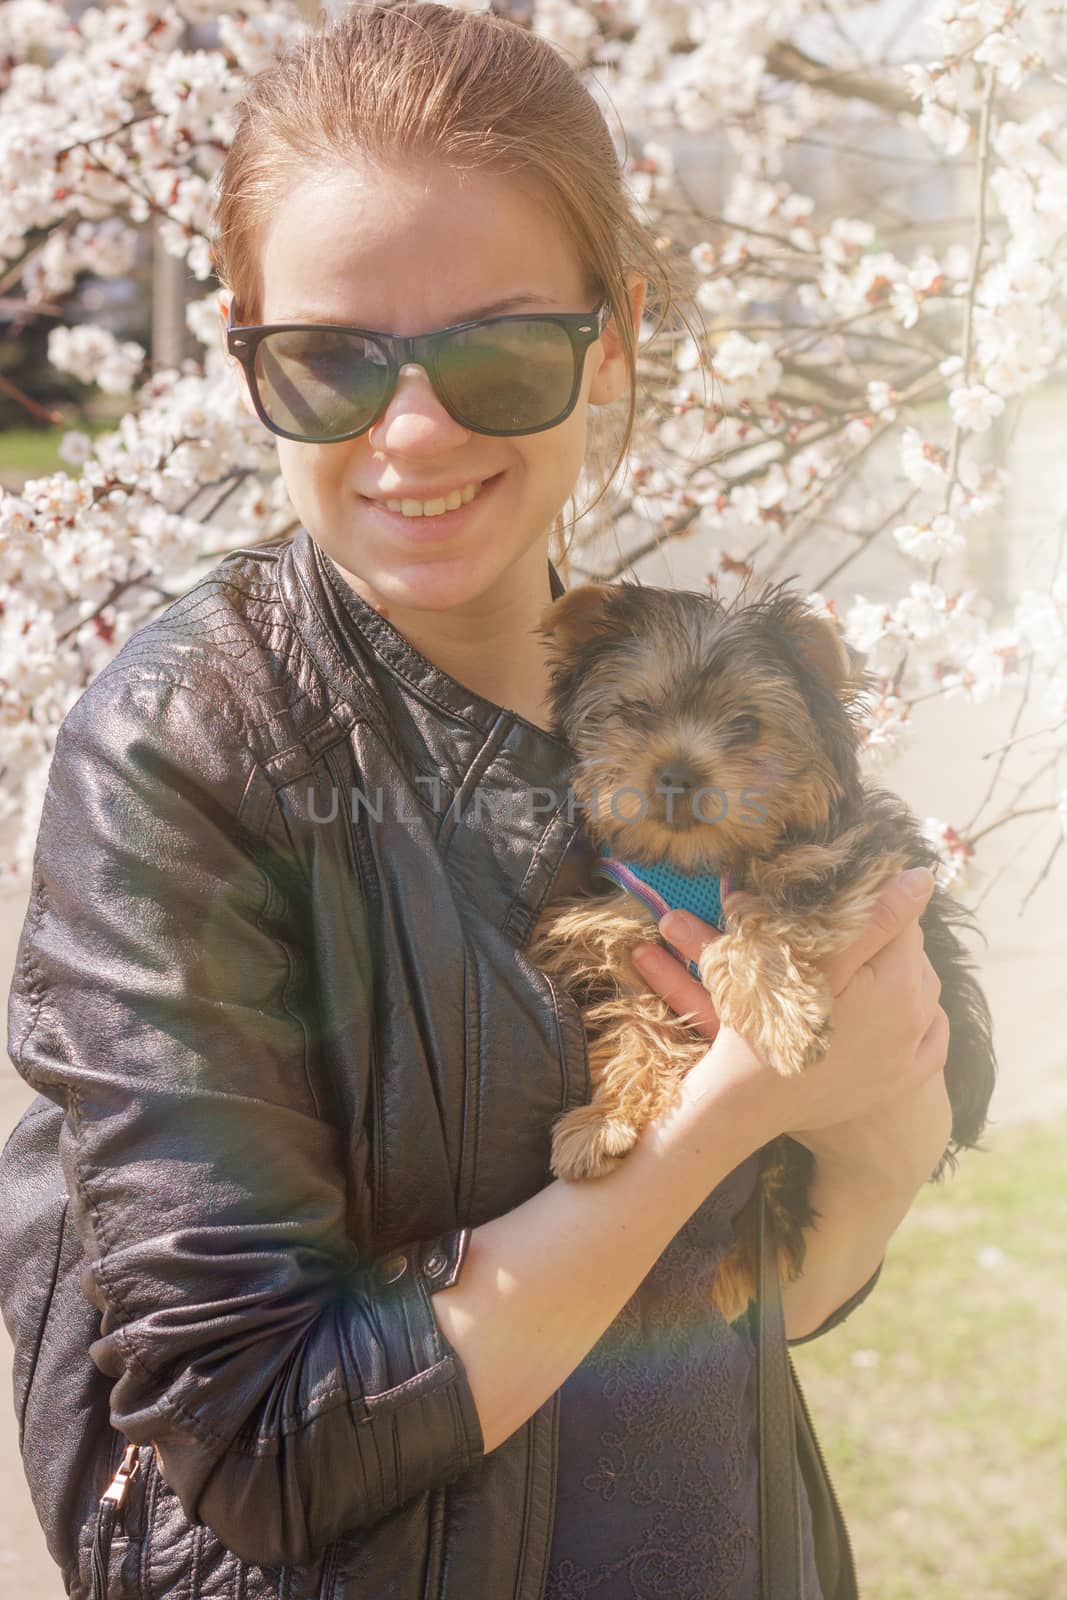 Yorkshire terrier puppy in the hands of the girl. In the spring blooming garden